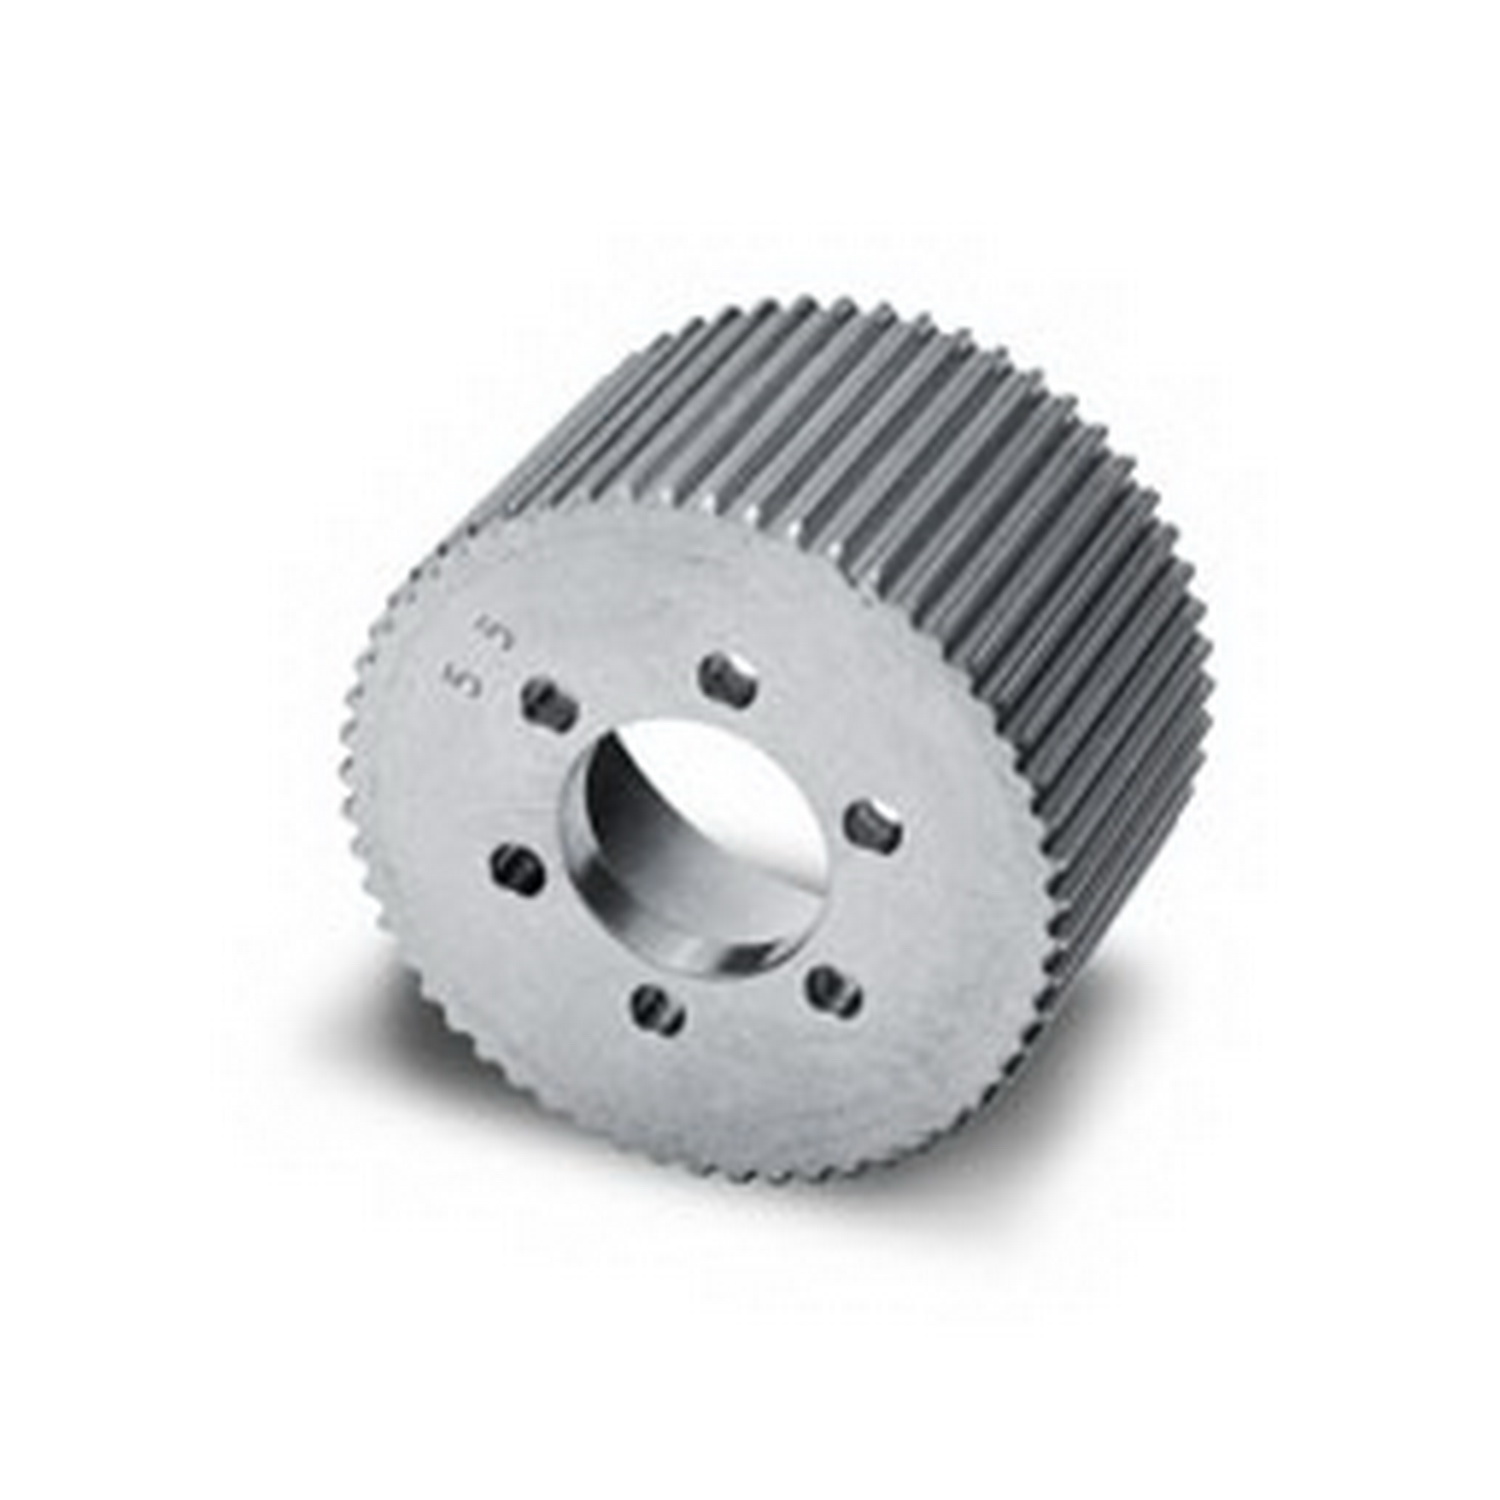 Weiand Weiand 7109-61 8mm Pitch Drive Pulley